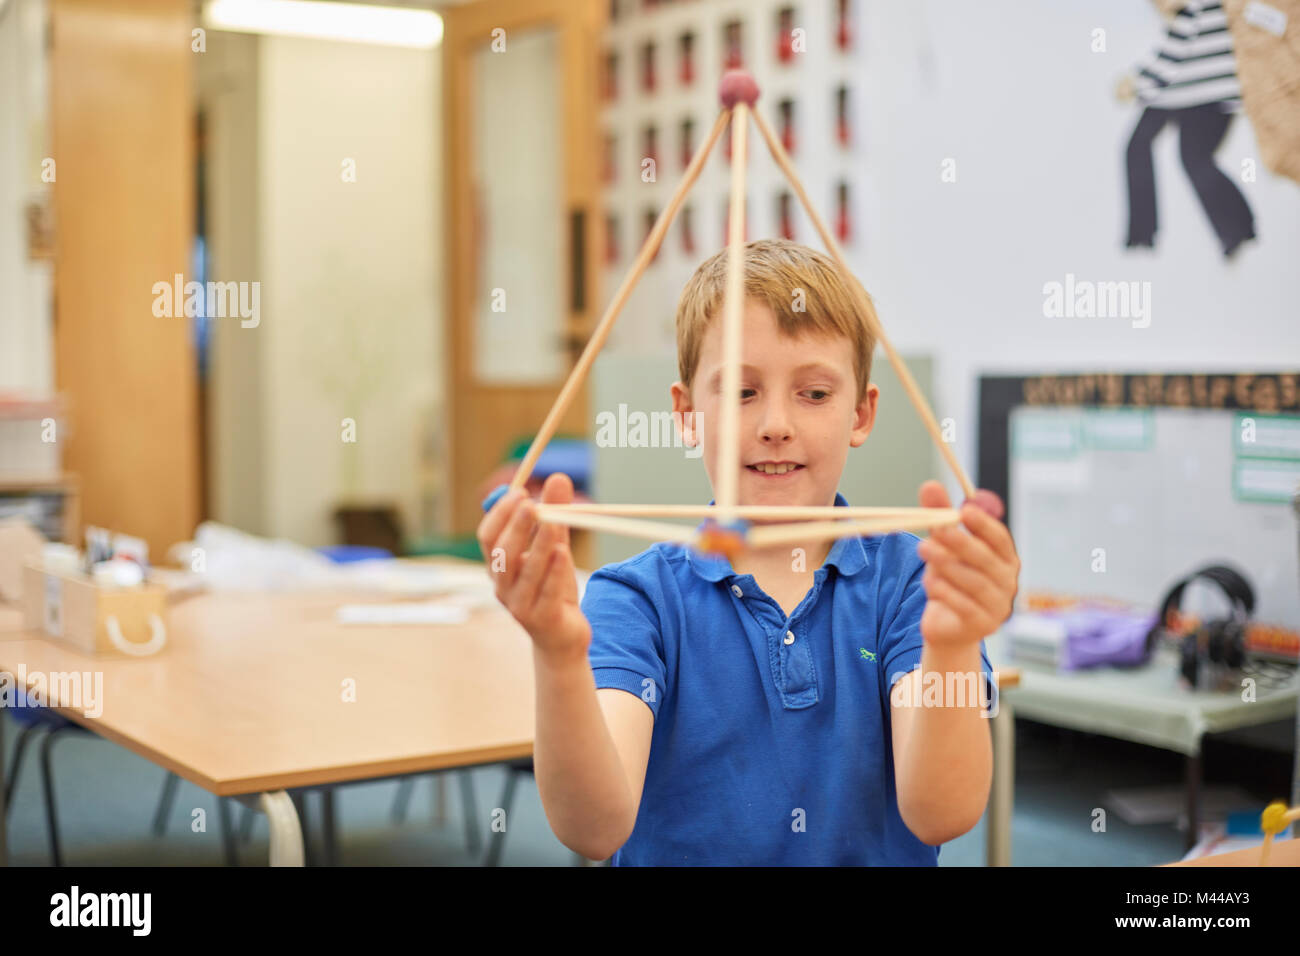 Primary schoolboy holding up plastic straw pyramid in classroom Stock Photo